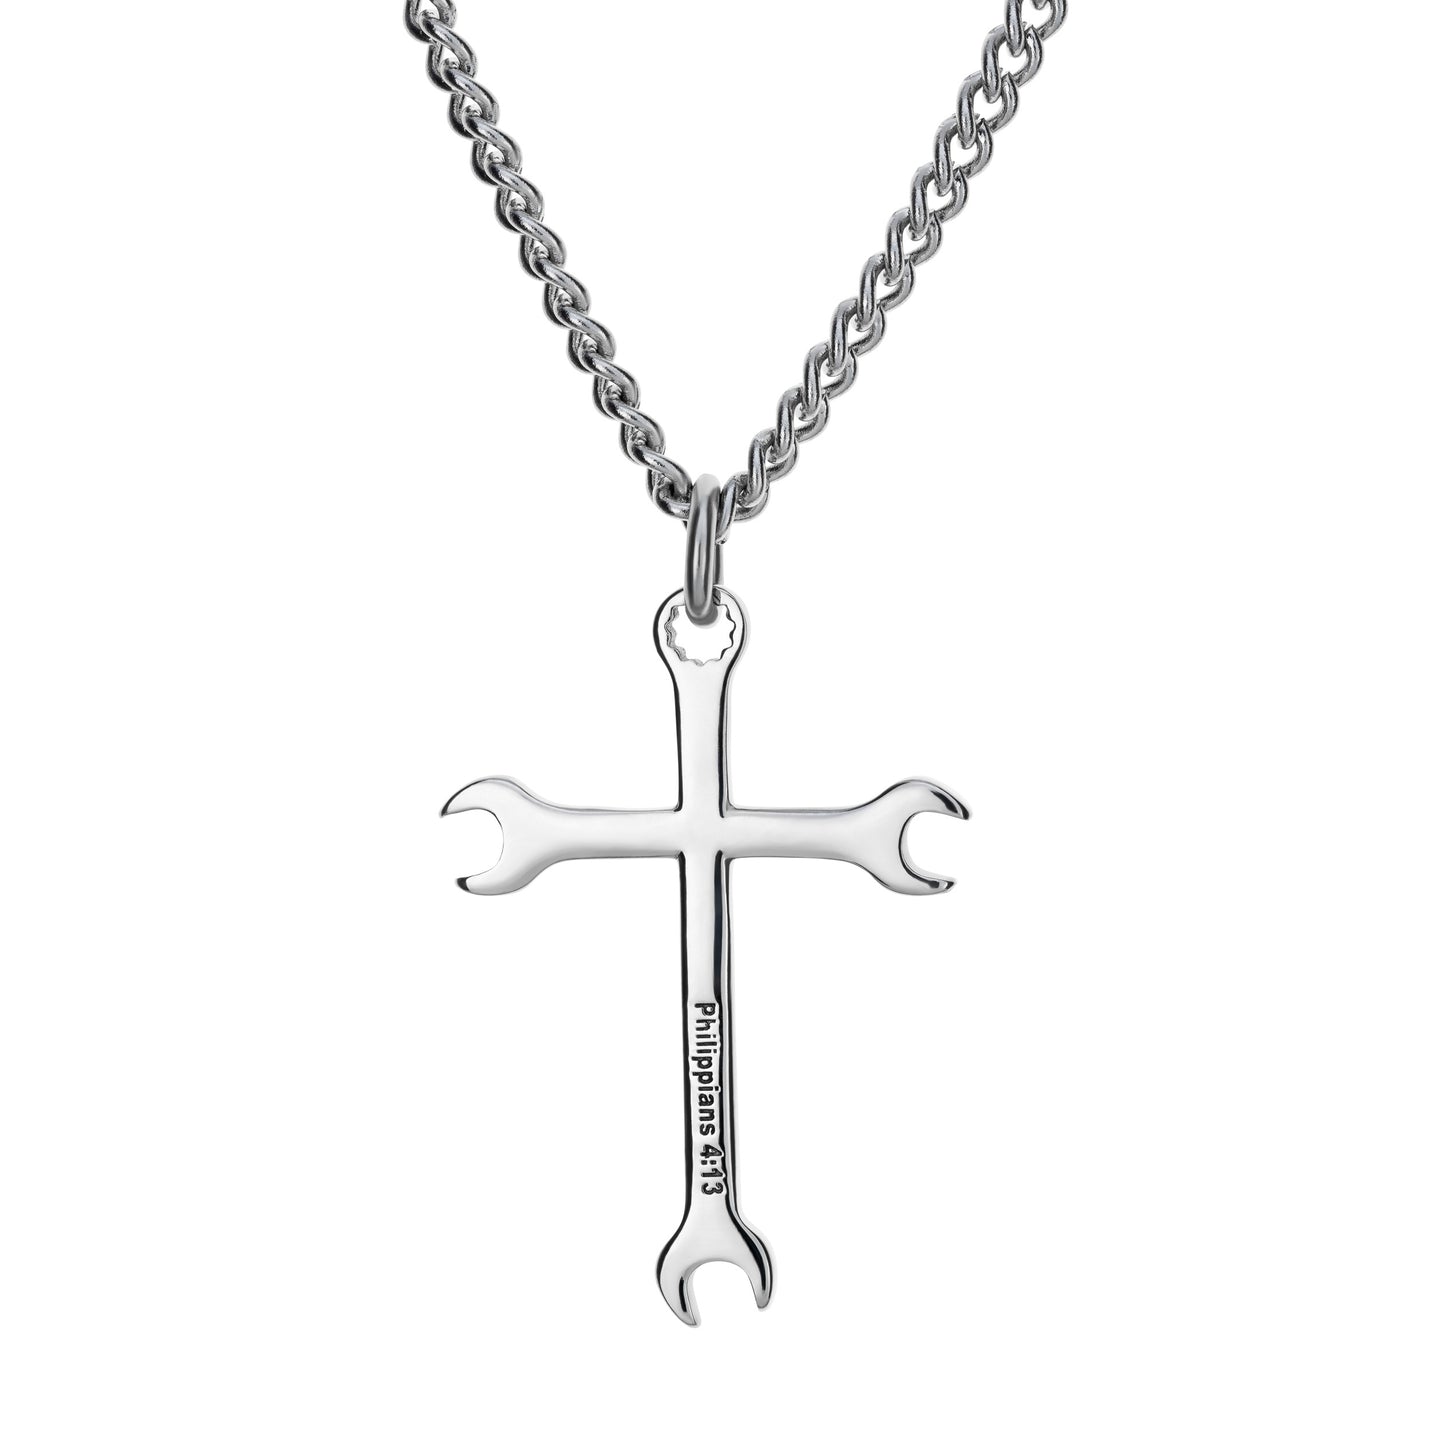 Shields of Strength-Stainless Steel Men's Wrench Cross Pendant Necklace - The Tool Store